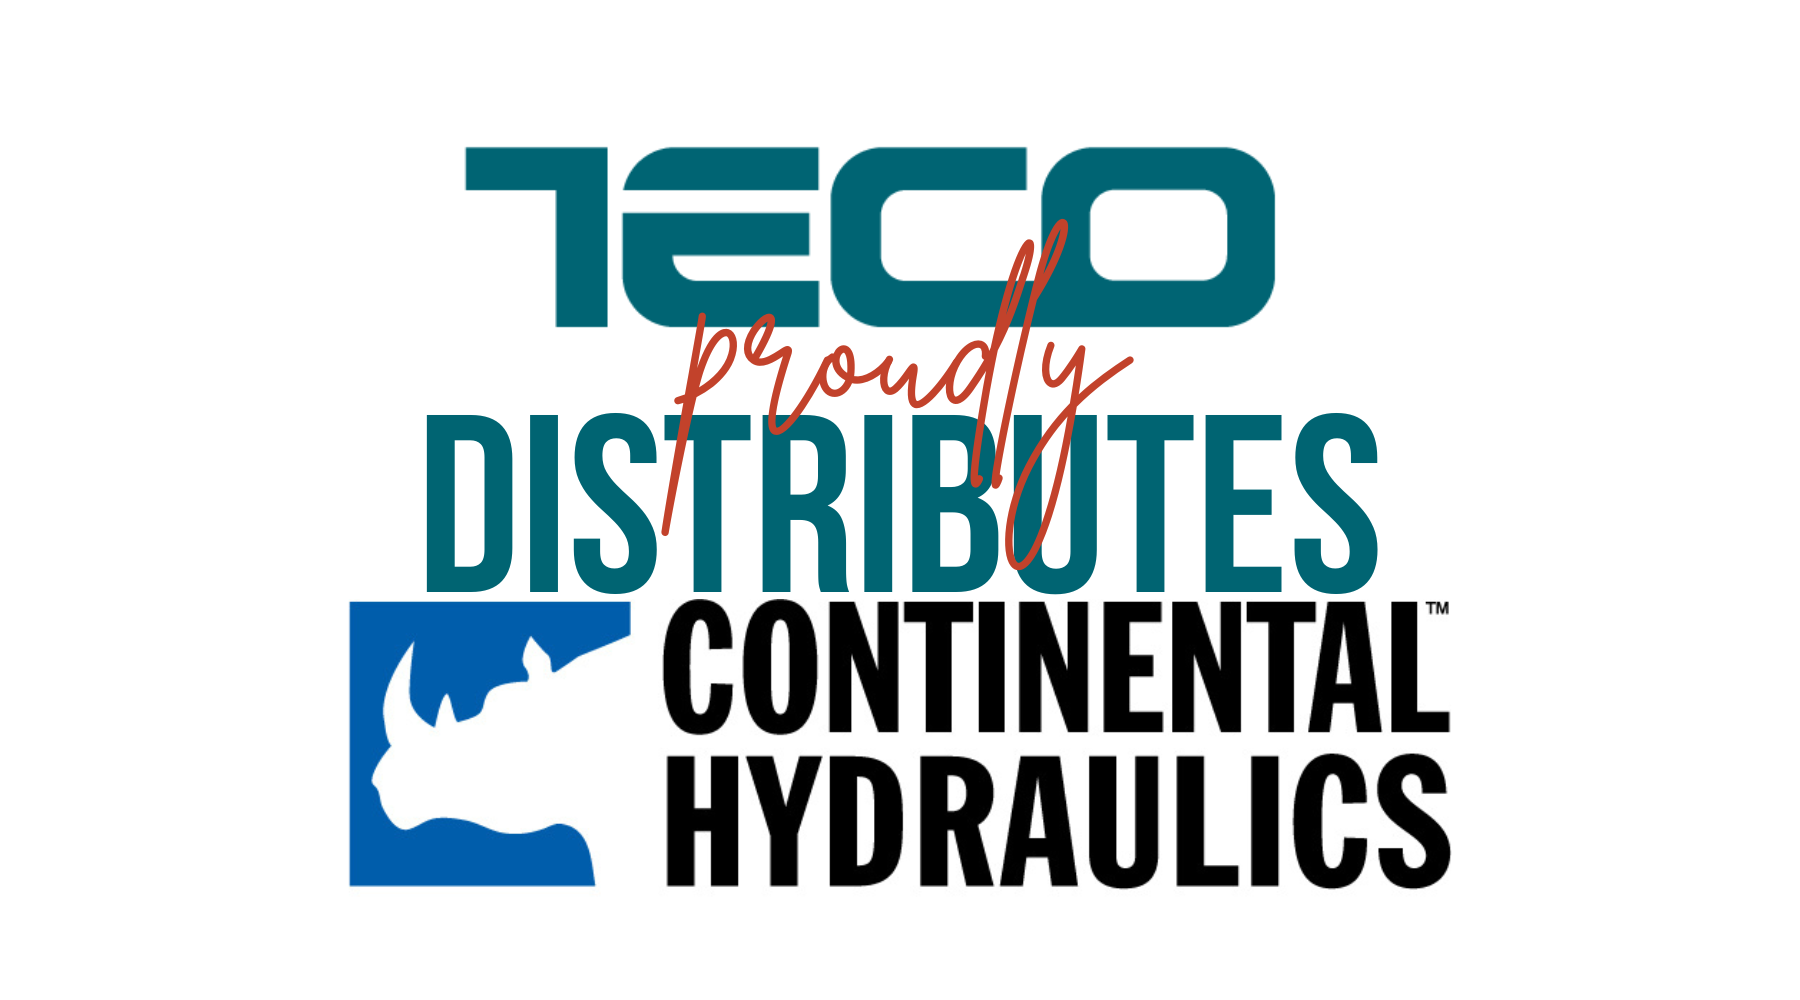 Teco proudly distributes Continental Hydraulics